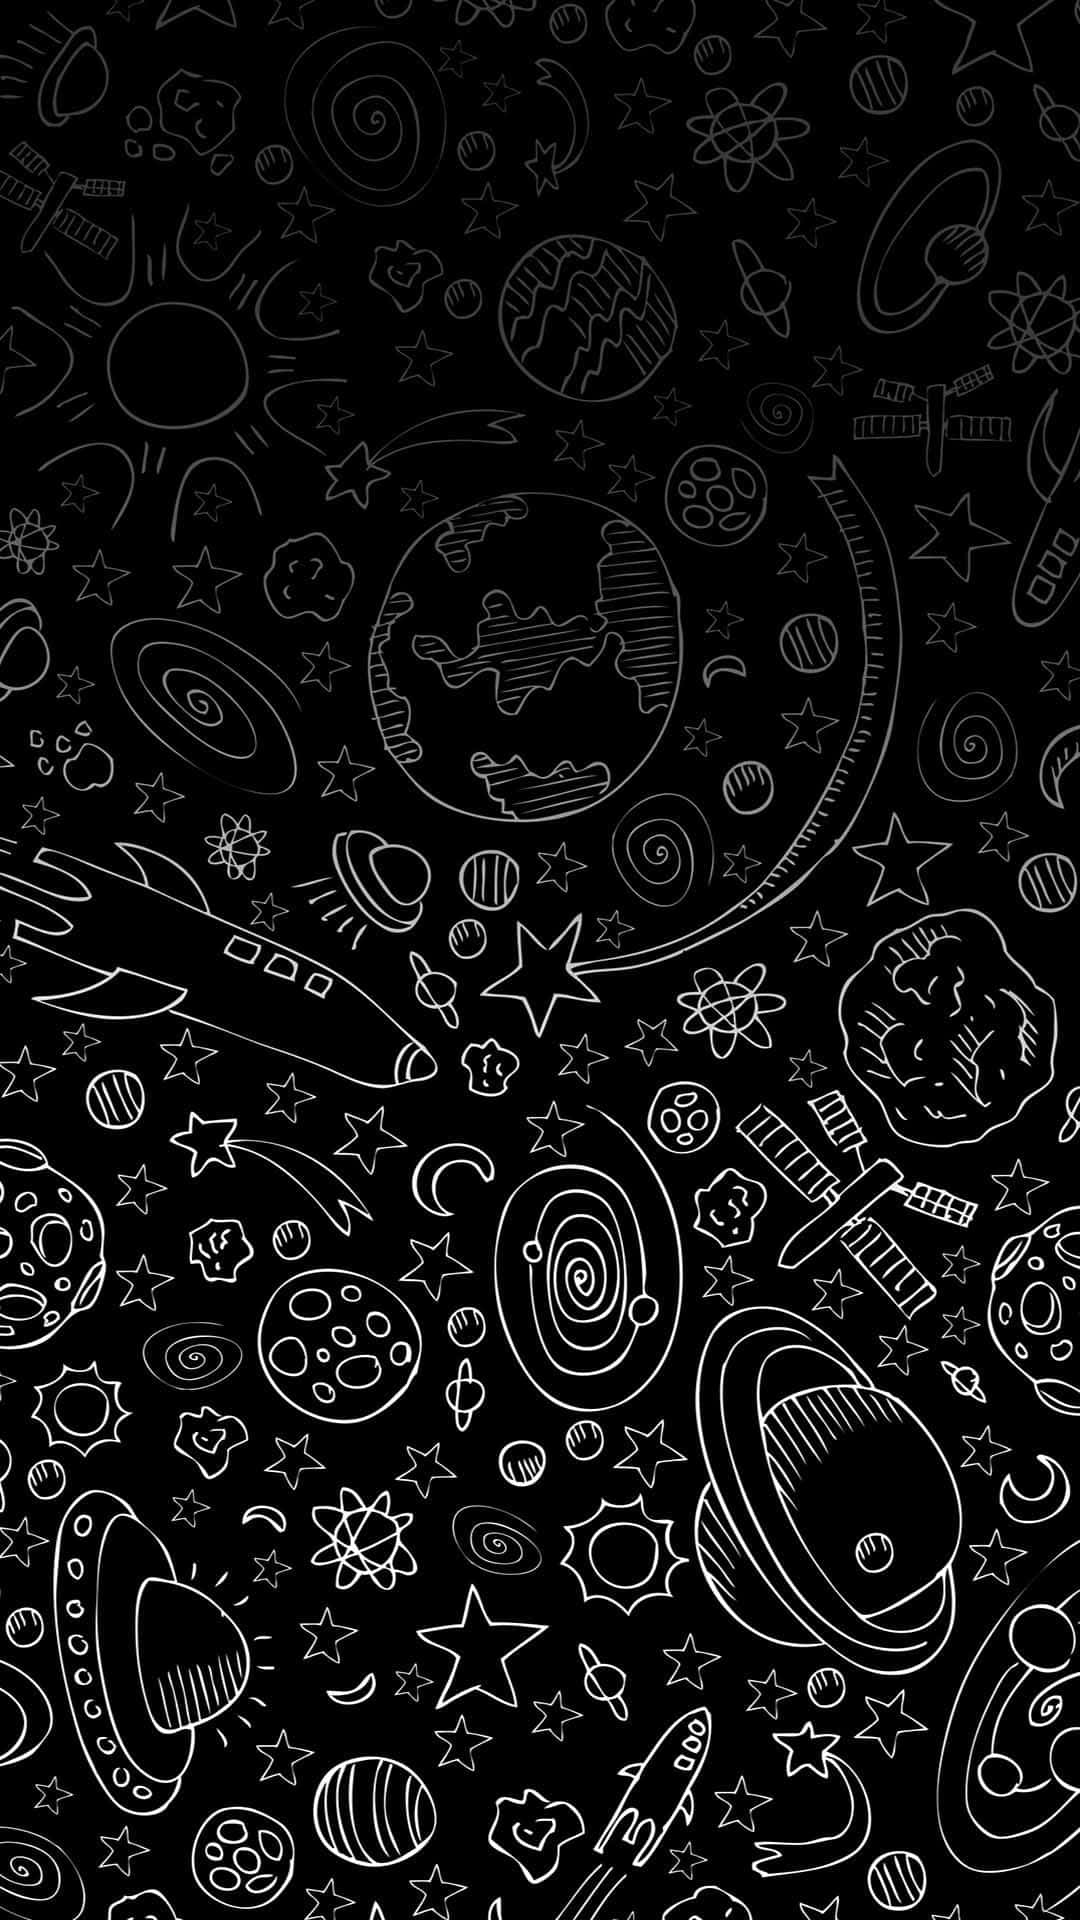 Download A Black Background With A Lot Of Space Objects | Wallpapers.com